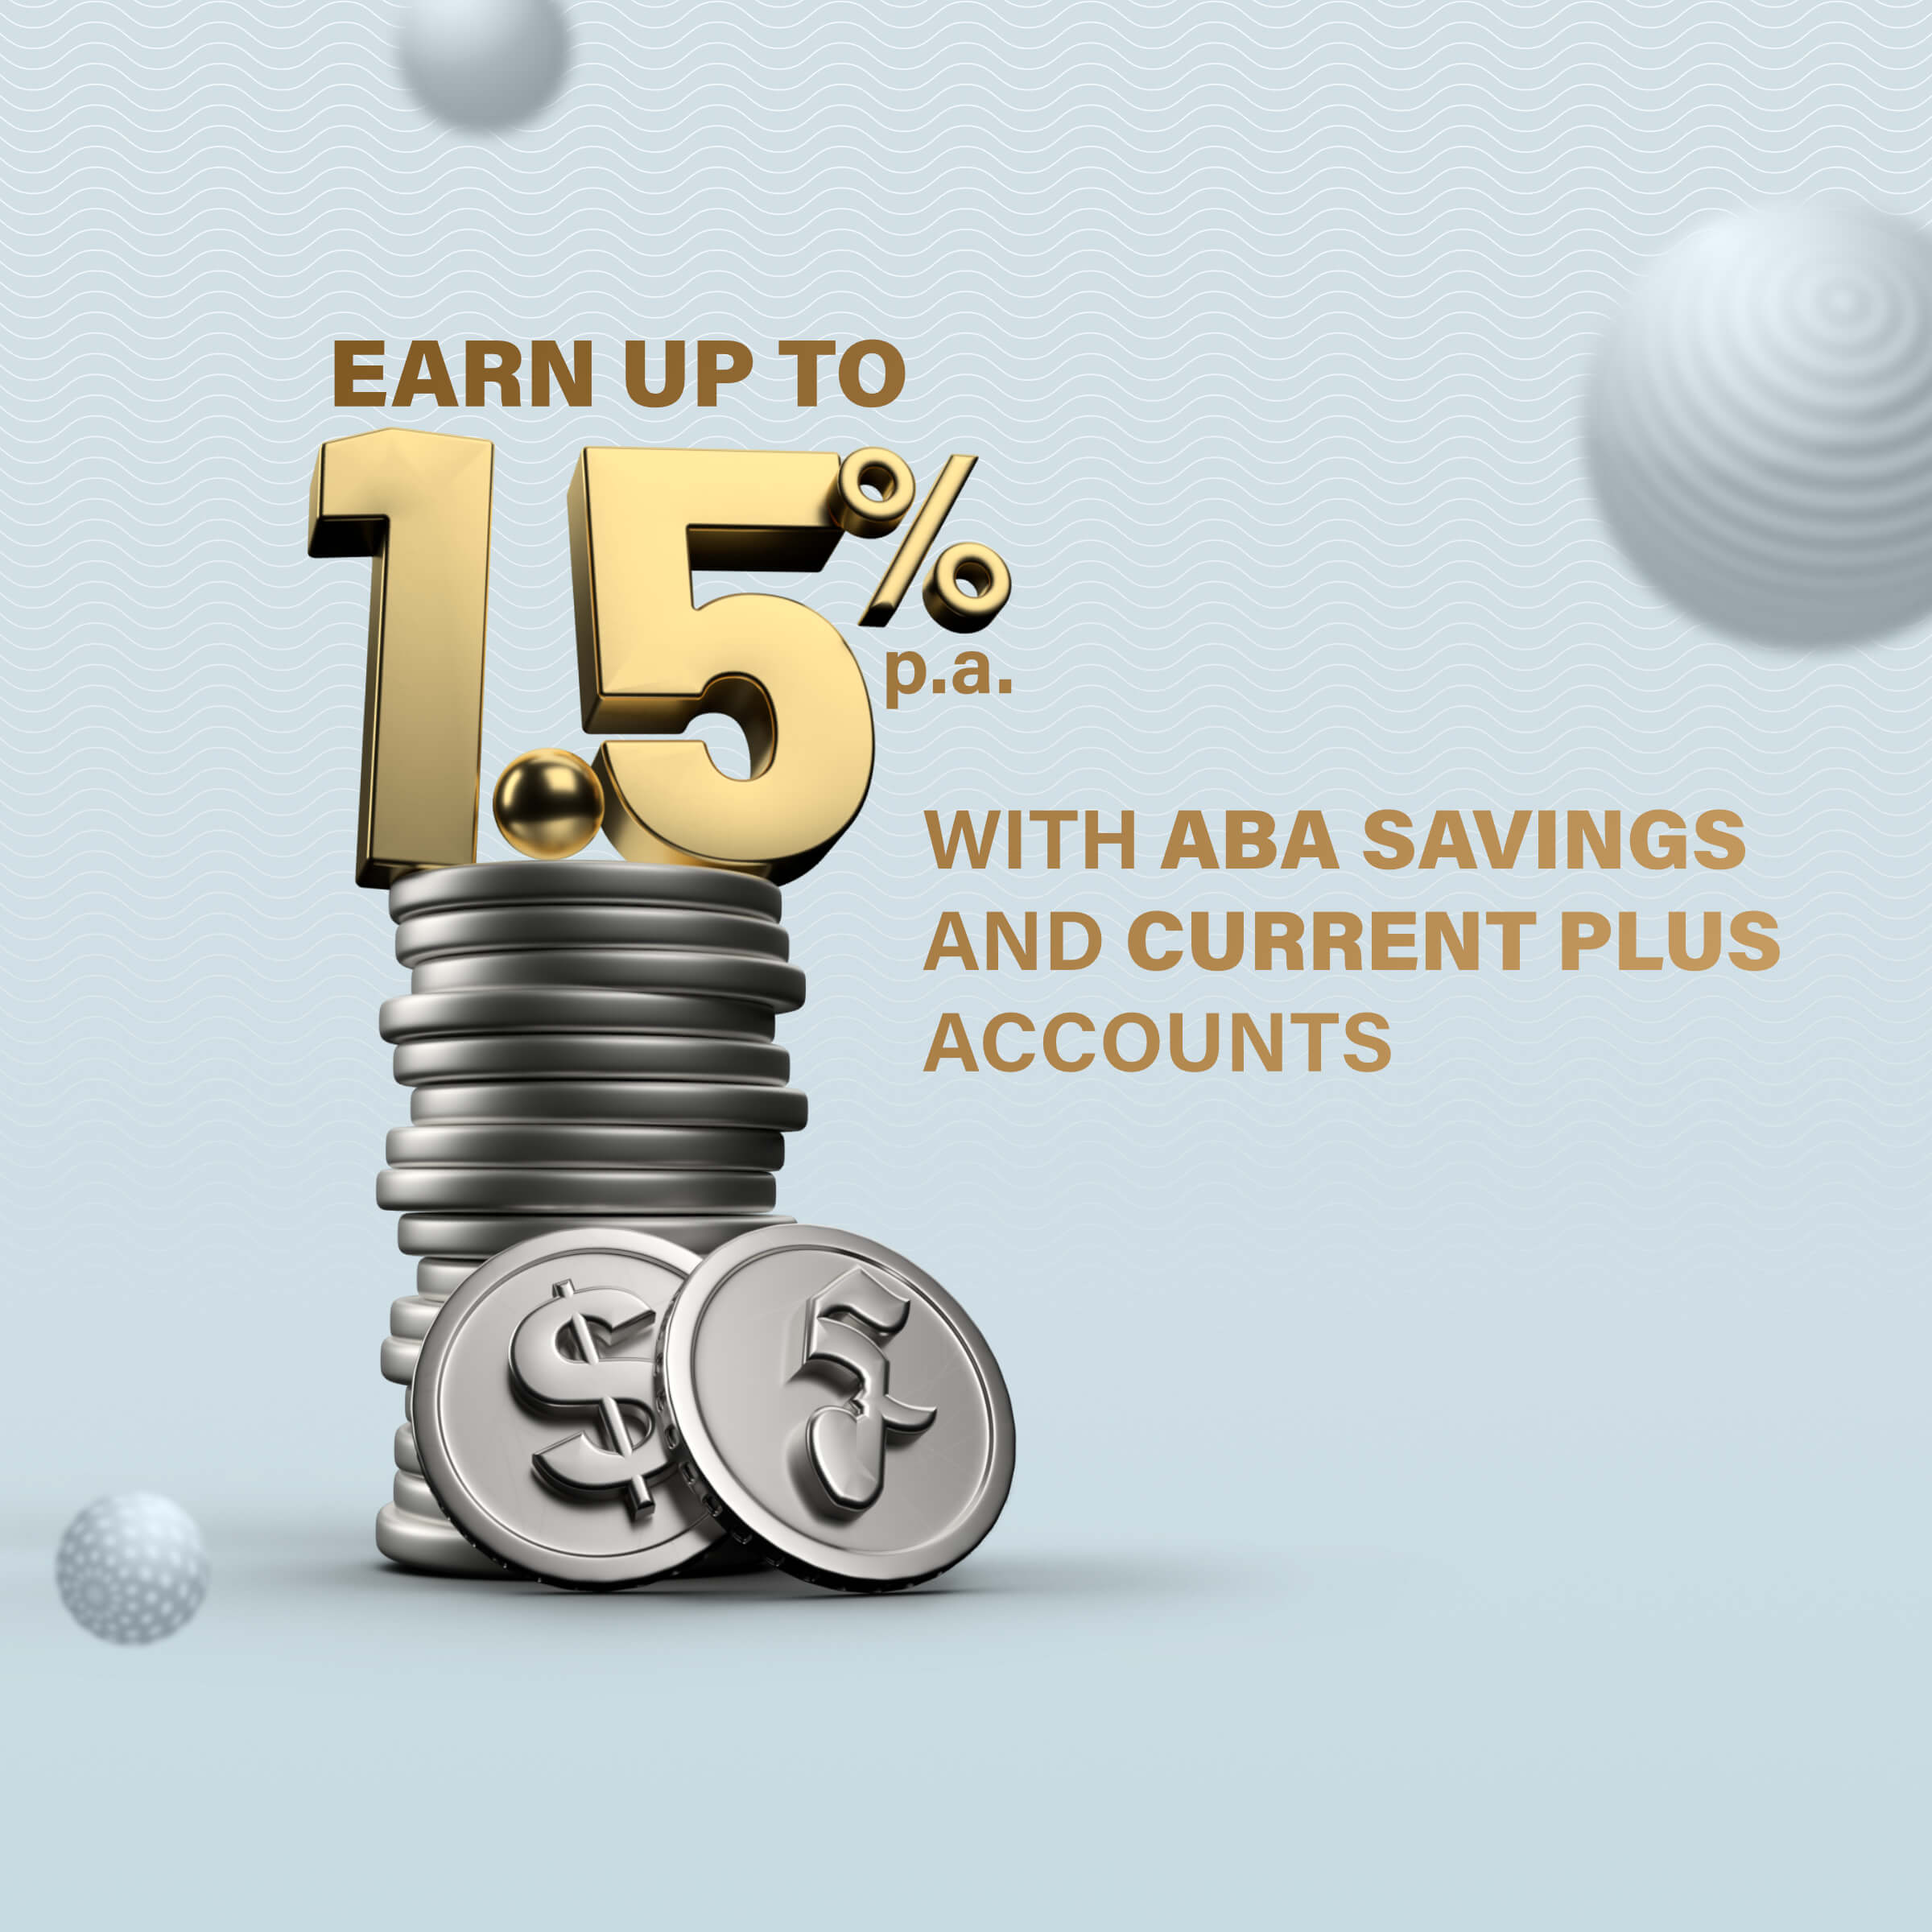 Earn​ up​ to​ 1.5%​ p.a.​ for​ Savings​ and​ Current​ PLUS​ accounts​ with​ ABA!